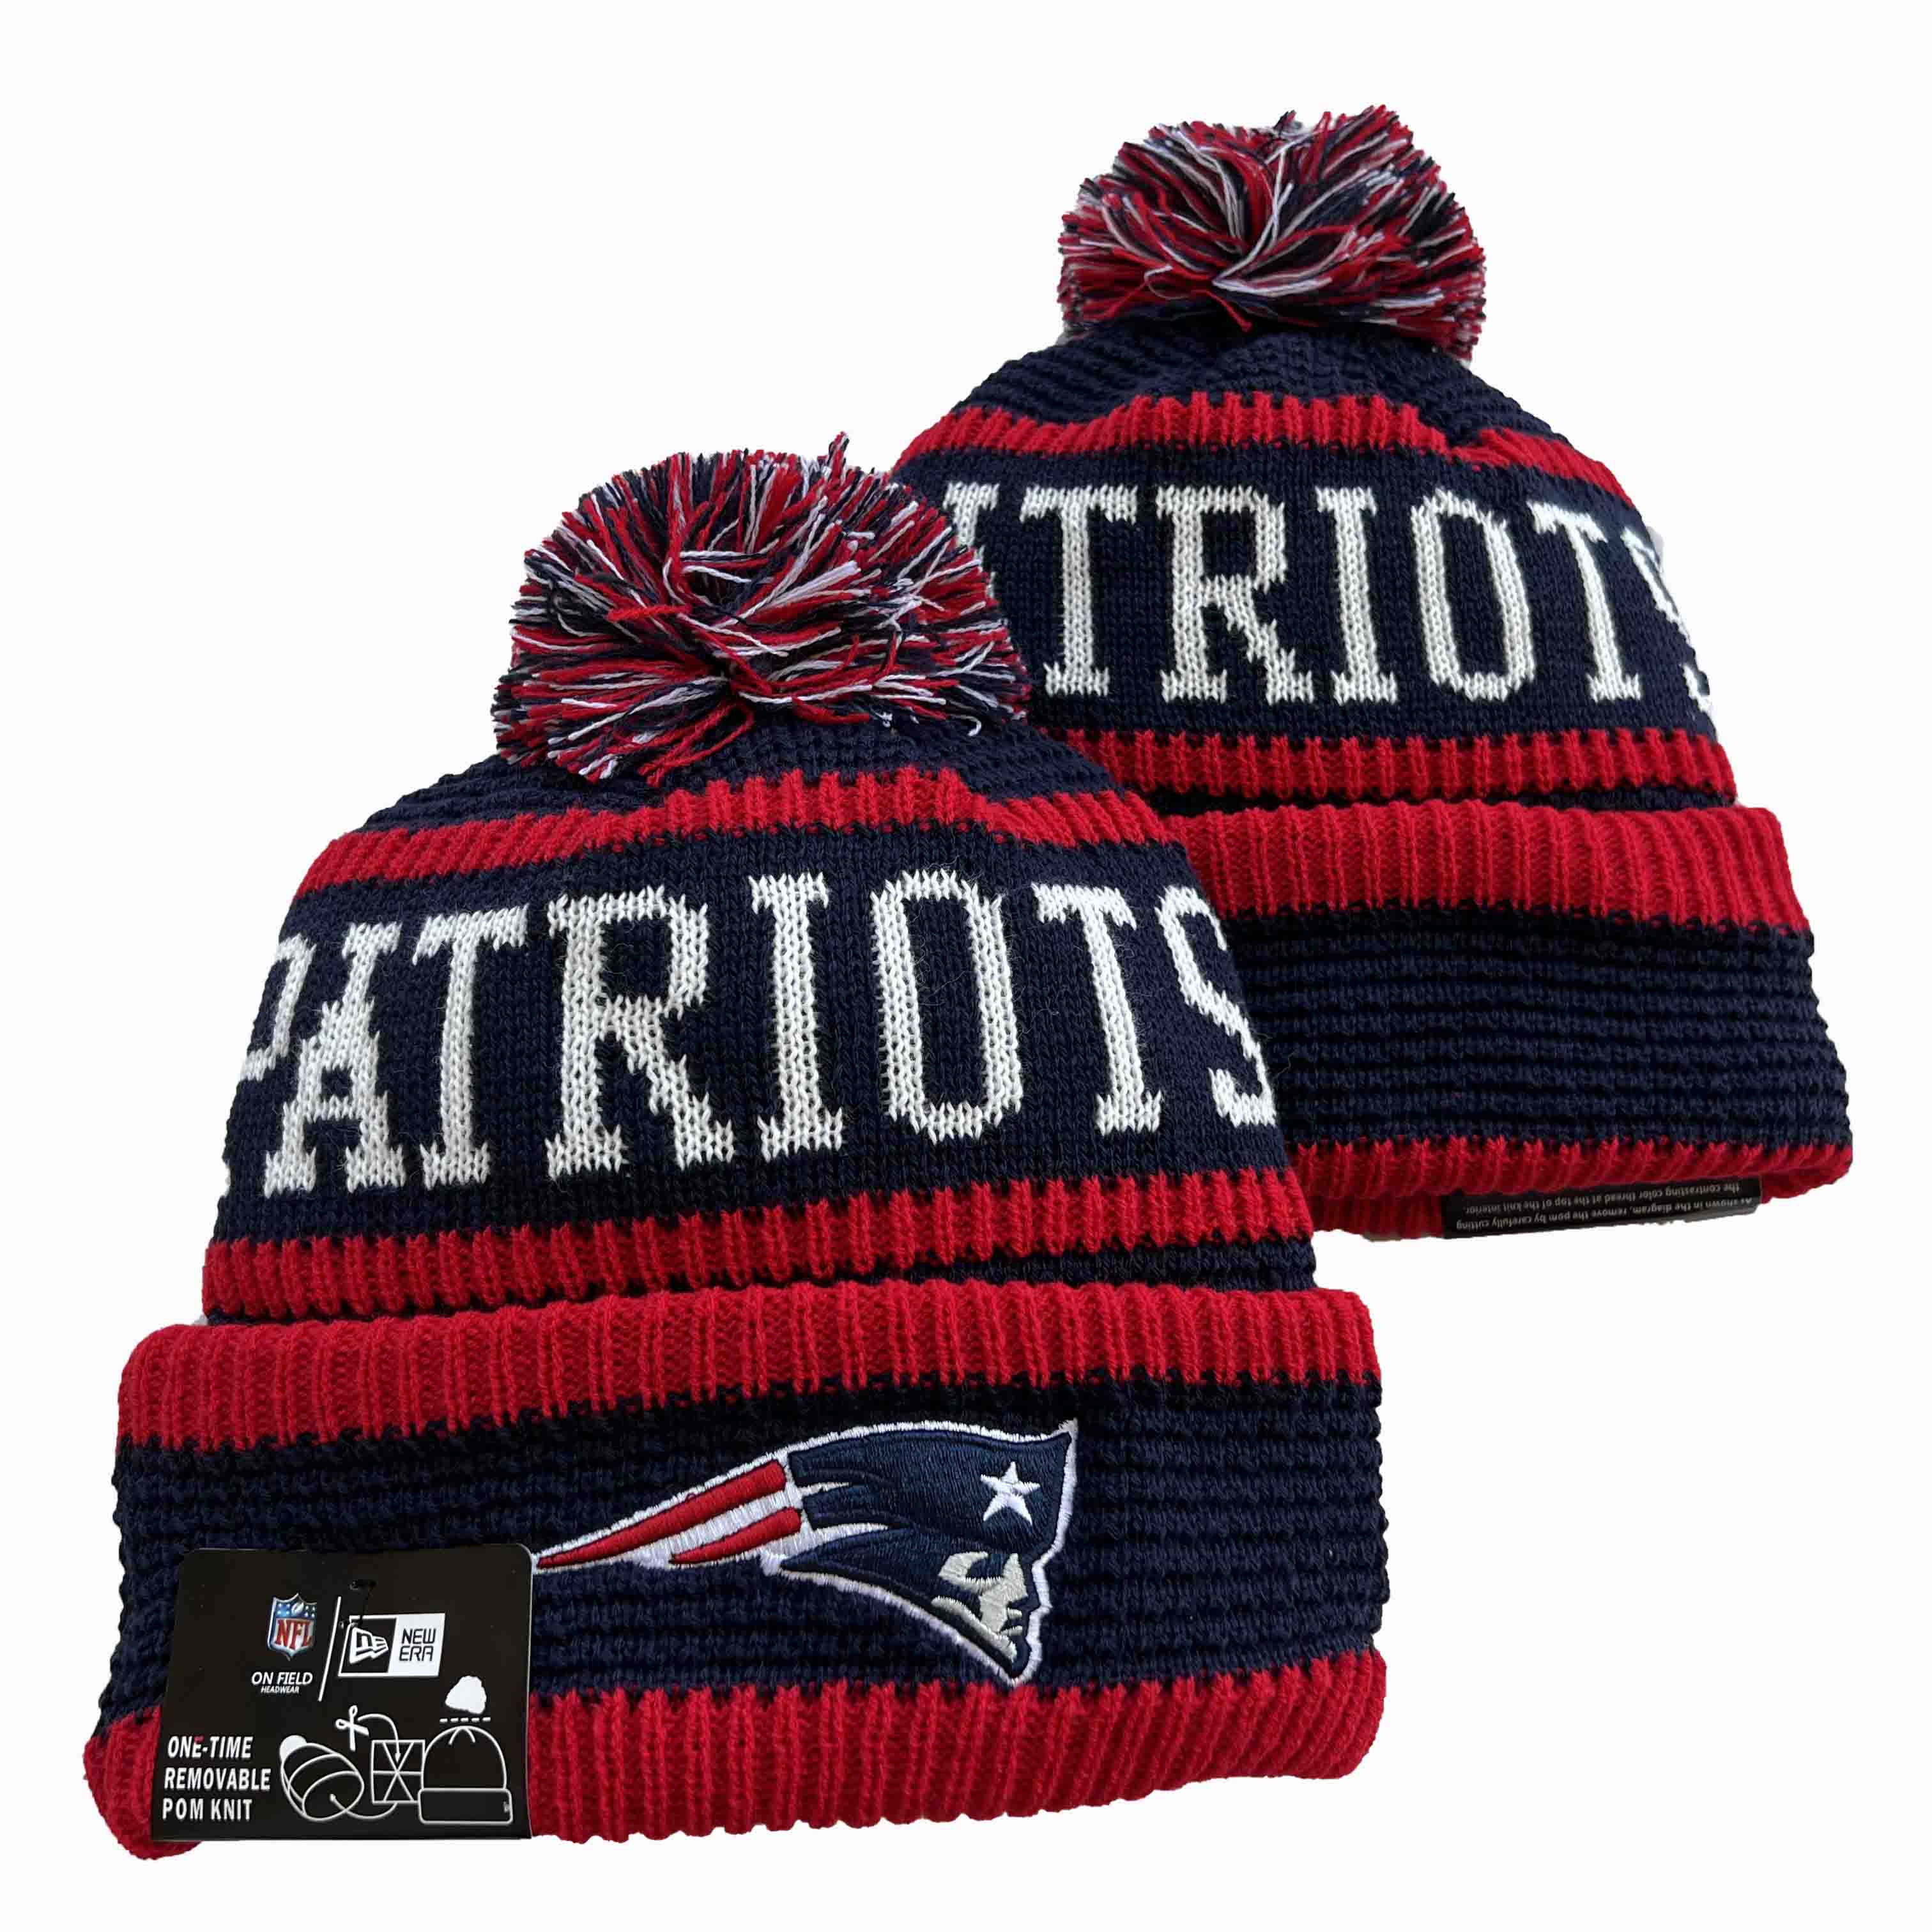 NFL New England Patriots Beanies Knit Hats-YD1246